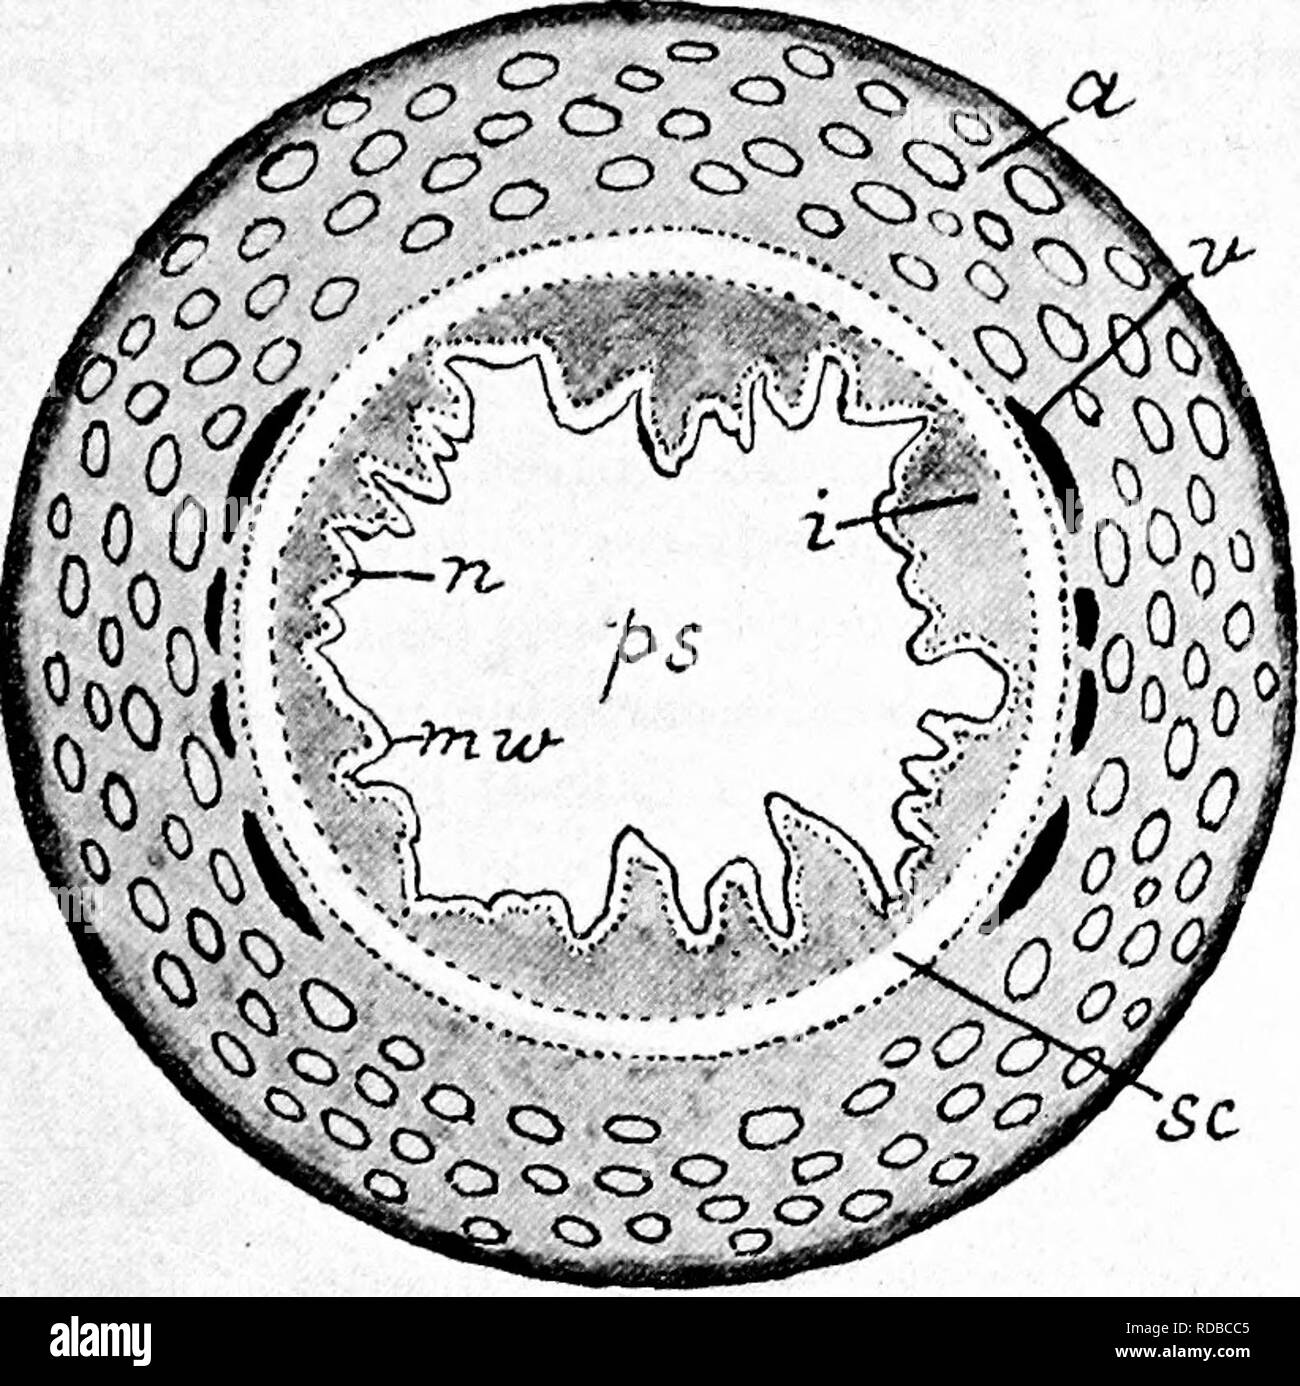 . Fossil plants : for students of botany and geology . Paleobotany. XLHl] SEEDS 121 the nucellus of Cycadean seeds. The portion of the Torreya seed (fig. 684, V) below the free part of the nucellus has, according to Oliver, been produced by the intercalation of a new basal region that has pushed up the chalaza. Cephalotaxus^ has plum-like seeds similar to those of Torreya. In Phyllocladus^ (fig. 675, E) an ovule enclosed in a papery epimatium occurs in the axil of a succulent bract, and in Taxus a terminal ovule is borne on a short shoot. Fig. 688. Torreya nucifera, transverse section of seed; Stock Photo